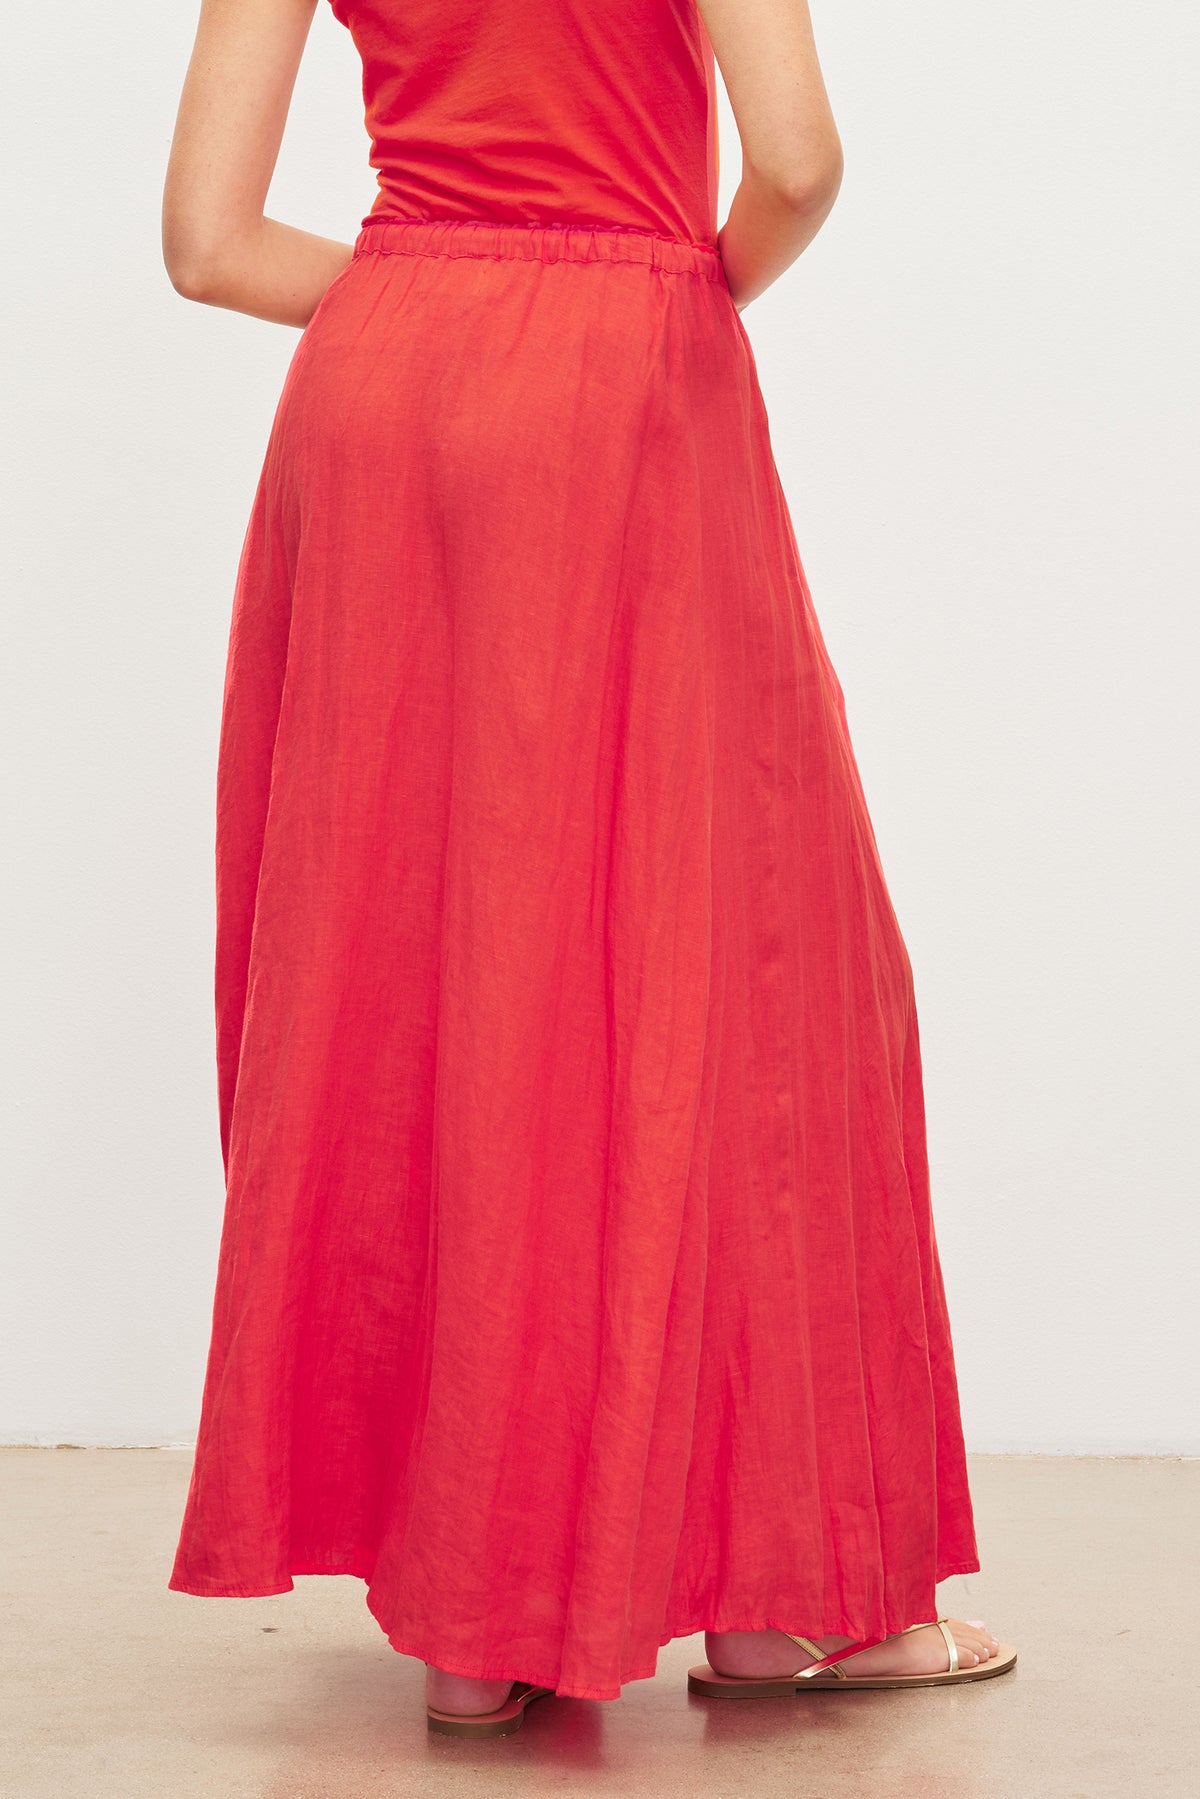 The woman is wearing a red Velvet by Graham & Spencer Bailey Linen Maxi Skirt.-35955626836161